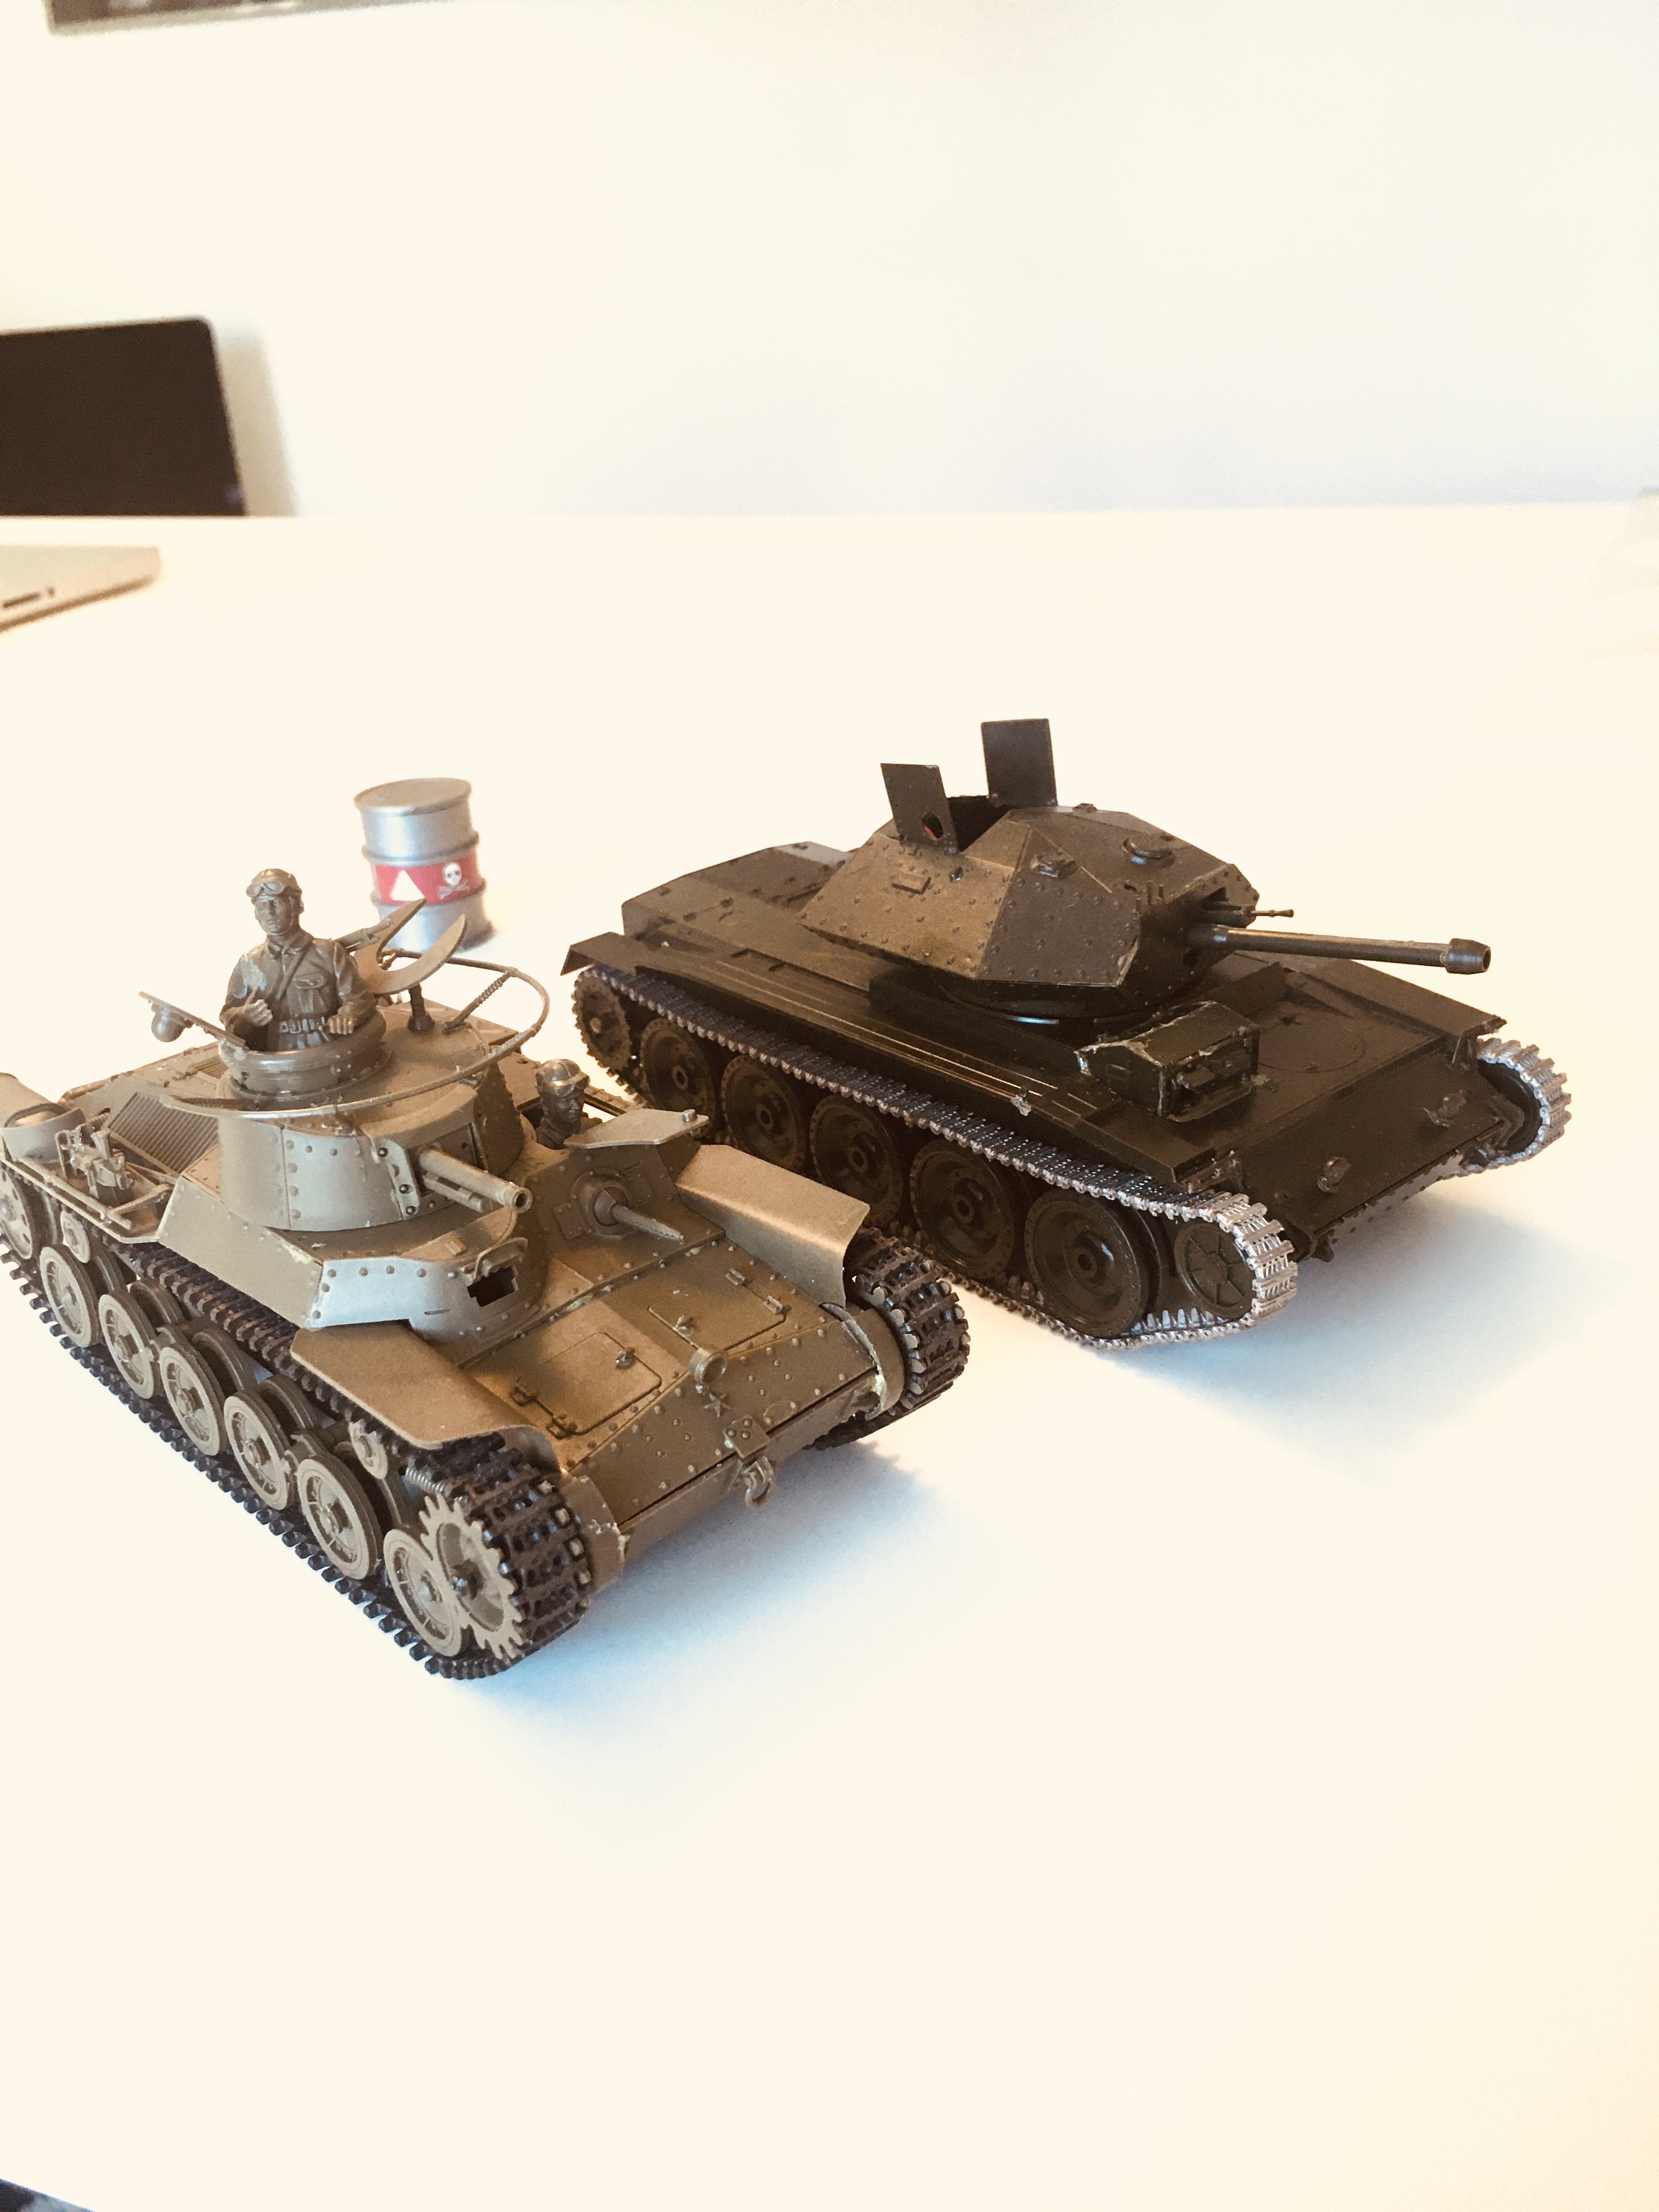 Type 97 and Crusader Mk III are the 2 most Challenging models builds I have ever successfully done.